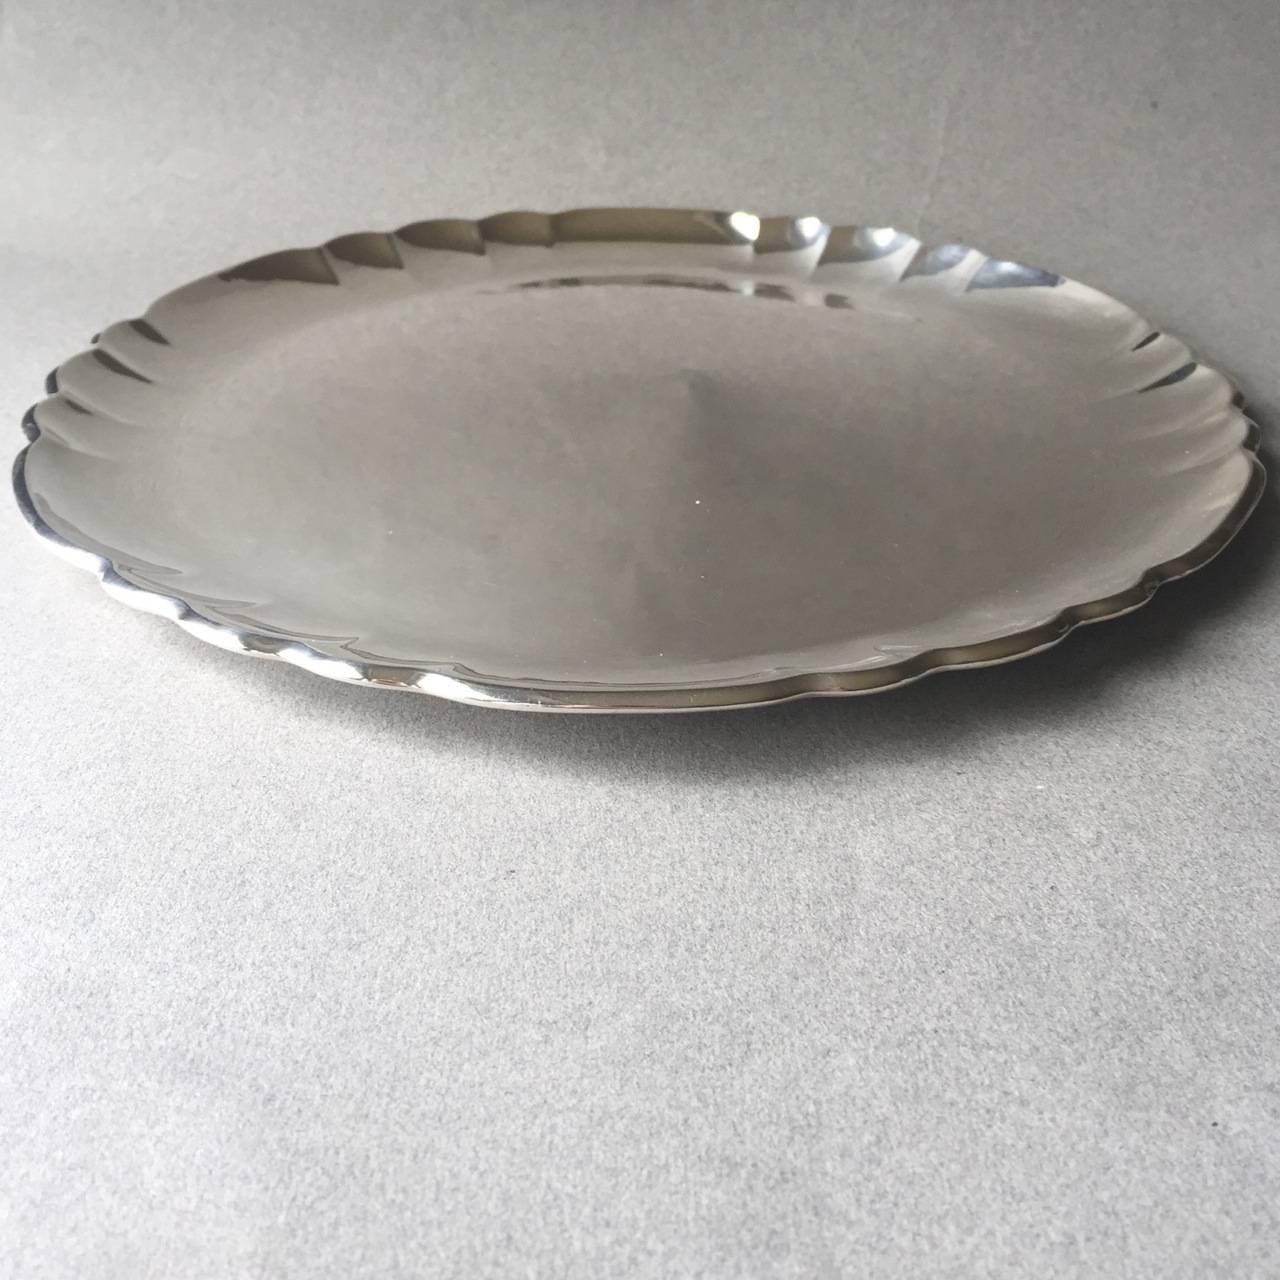 Georg Jensen sterling silver tray no. 519C.

This is a fine example of Georg Jensen craftsmanship, circa 1925-1932. This hand-hammered tray is circular with scalloped edges.

Measures: 10.75